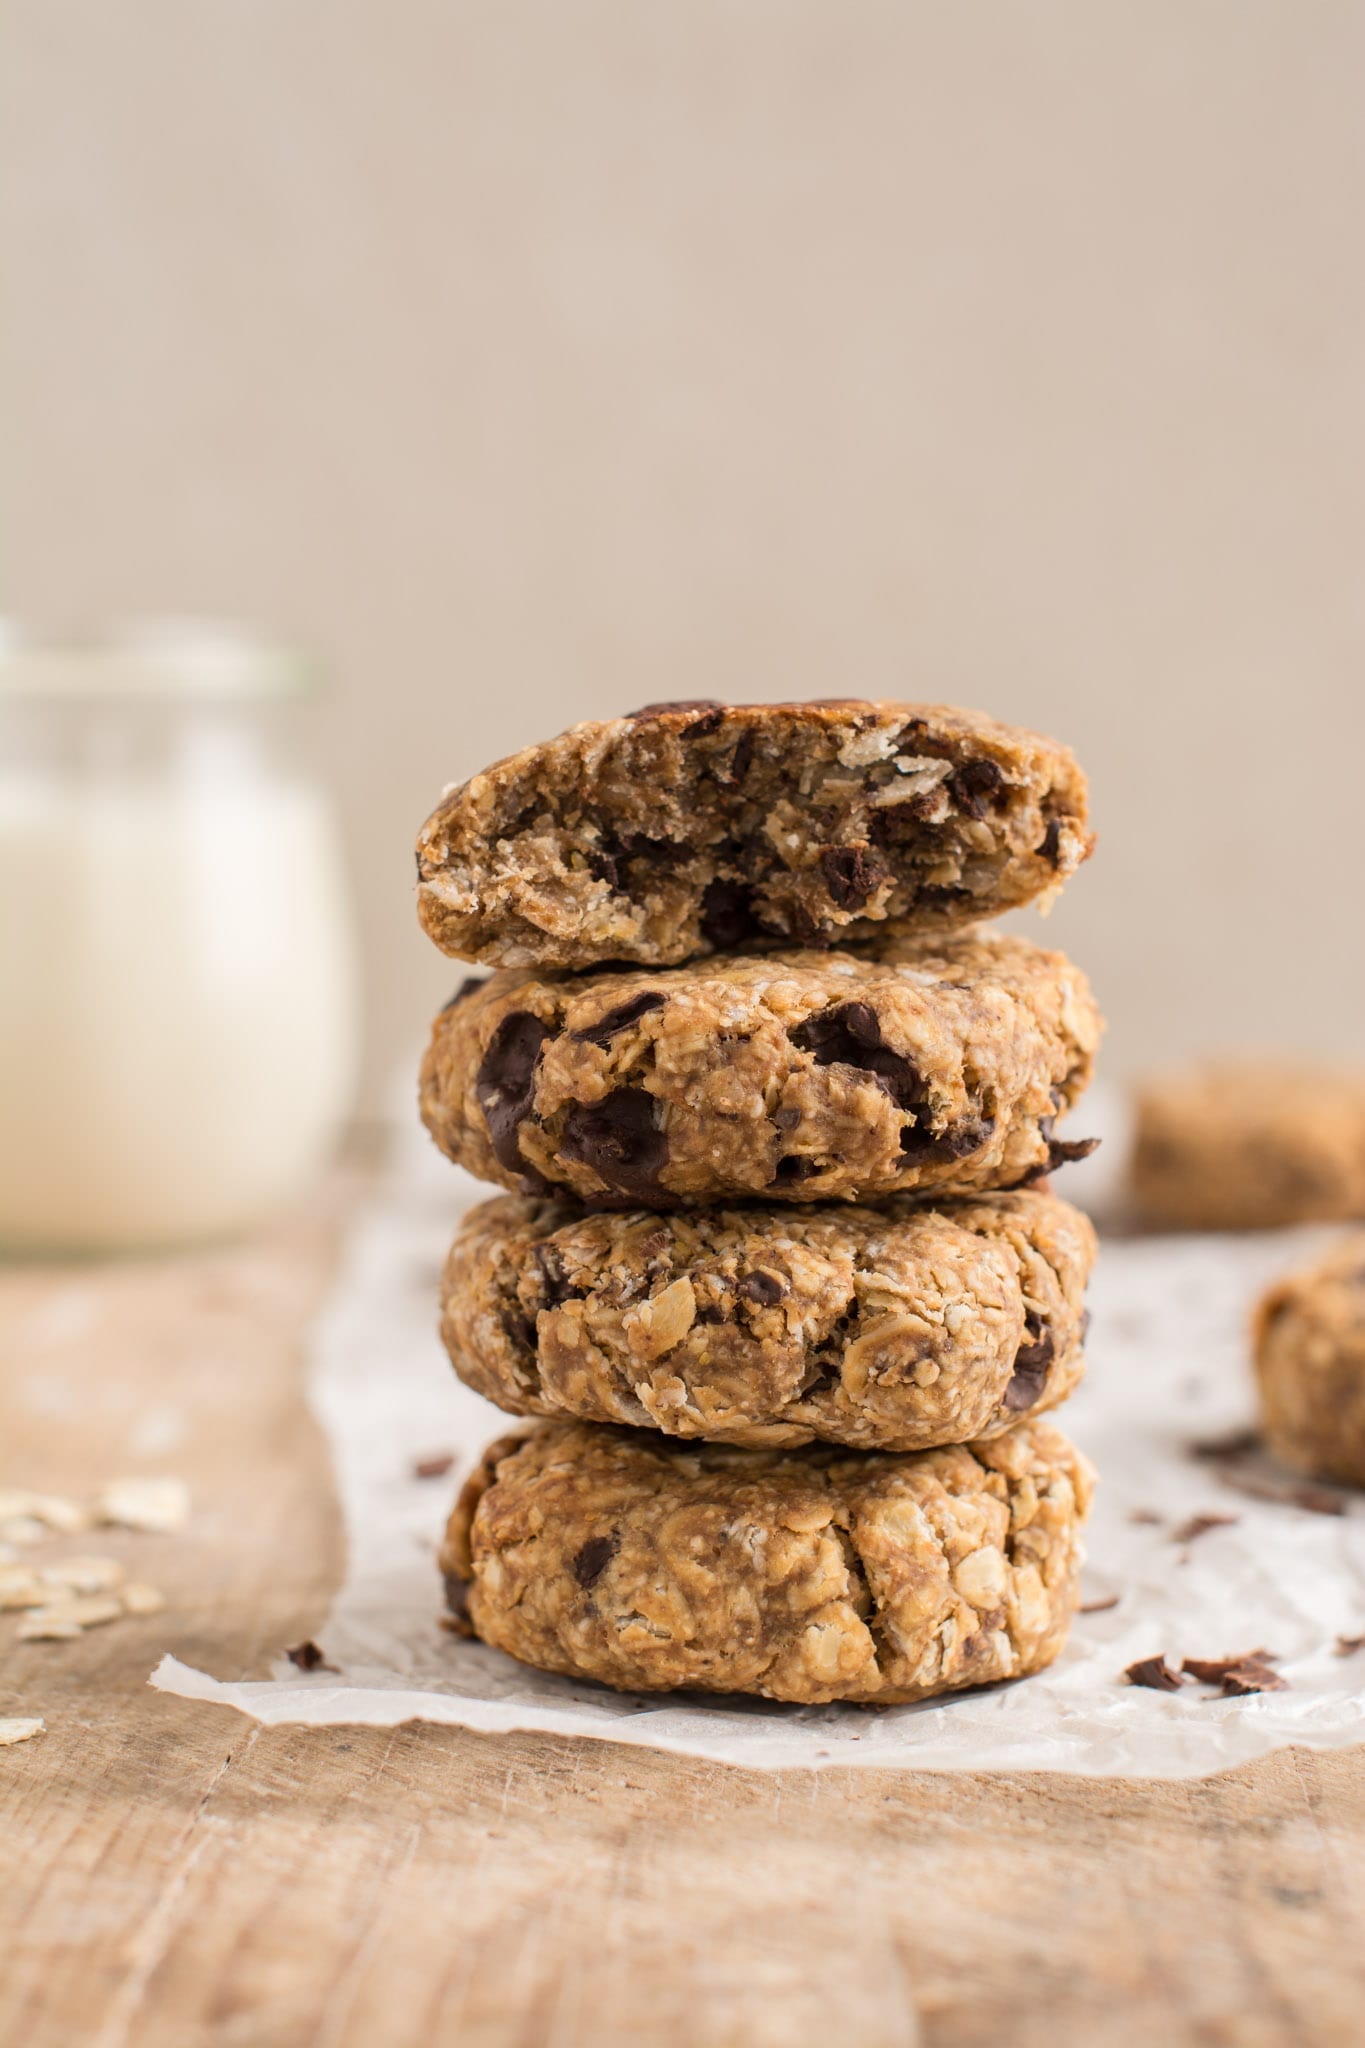 Super easy and delicious vegan oatmeal cookies that are soft and chewy using whole food plant-based ingredients.